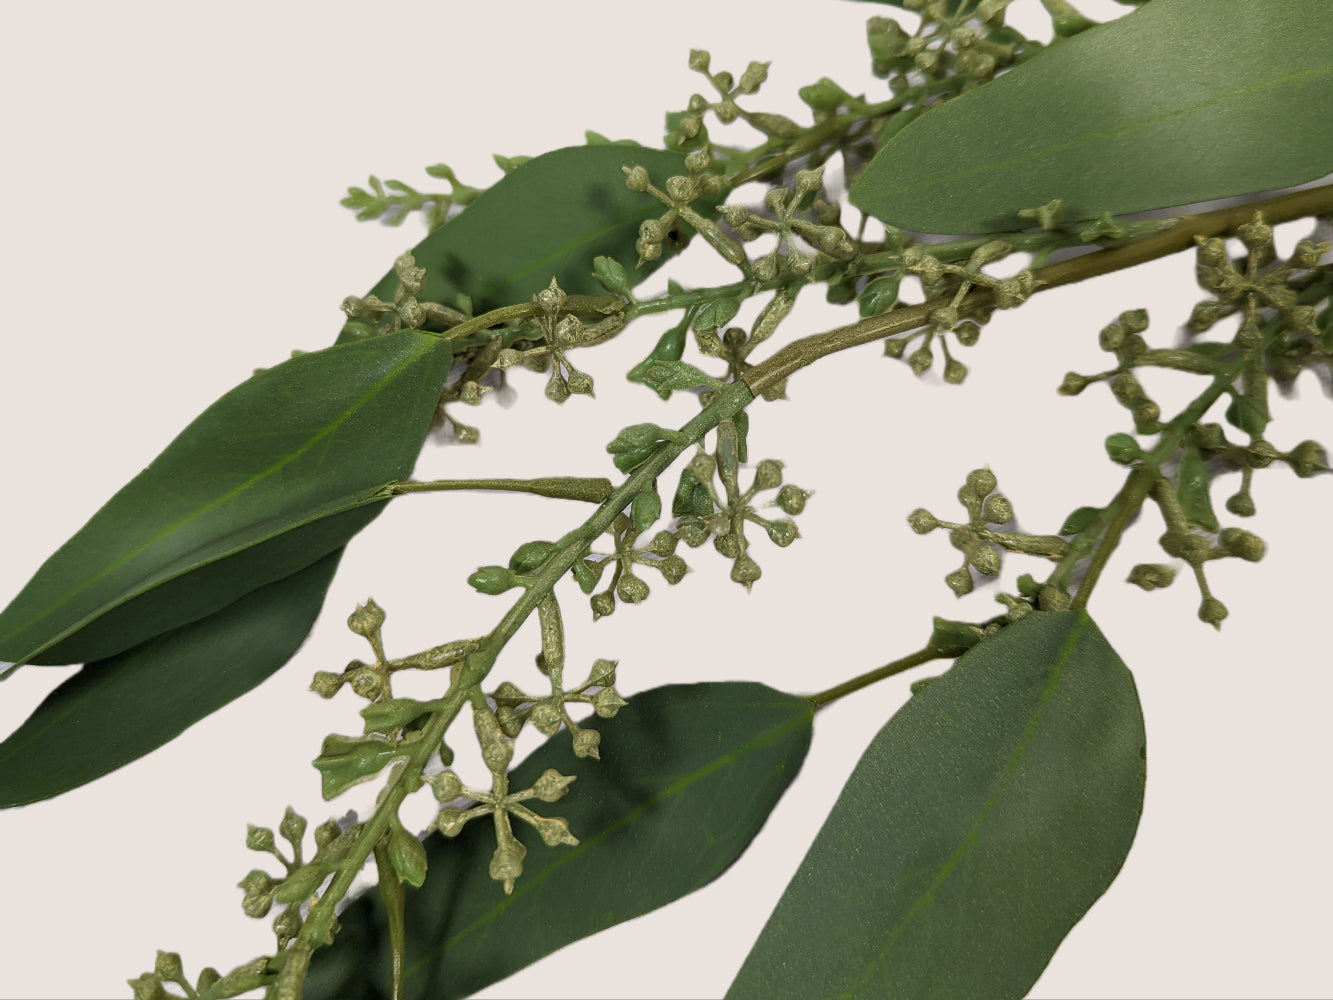 A close up image of a single artificial seeded eucalyptus branch against a white background. The branch is 28 inches long and features lifelike sage green leaves with realistic veining and texture. The seeded eucalyptus branch adds natural and organic charm to any floral arrangement or home decor. The image showcases the intricate details and lifelike appearance of the artificial branch, including the color, texture, and shape of the leaves.